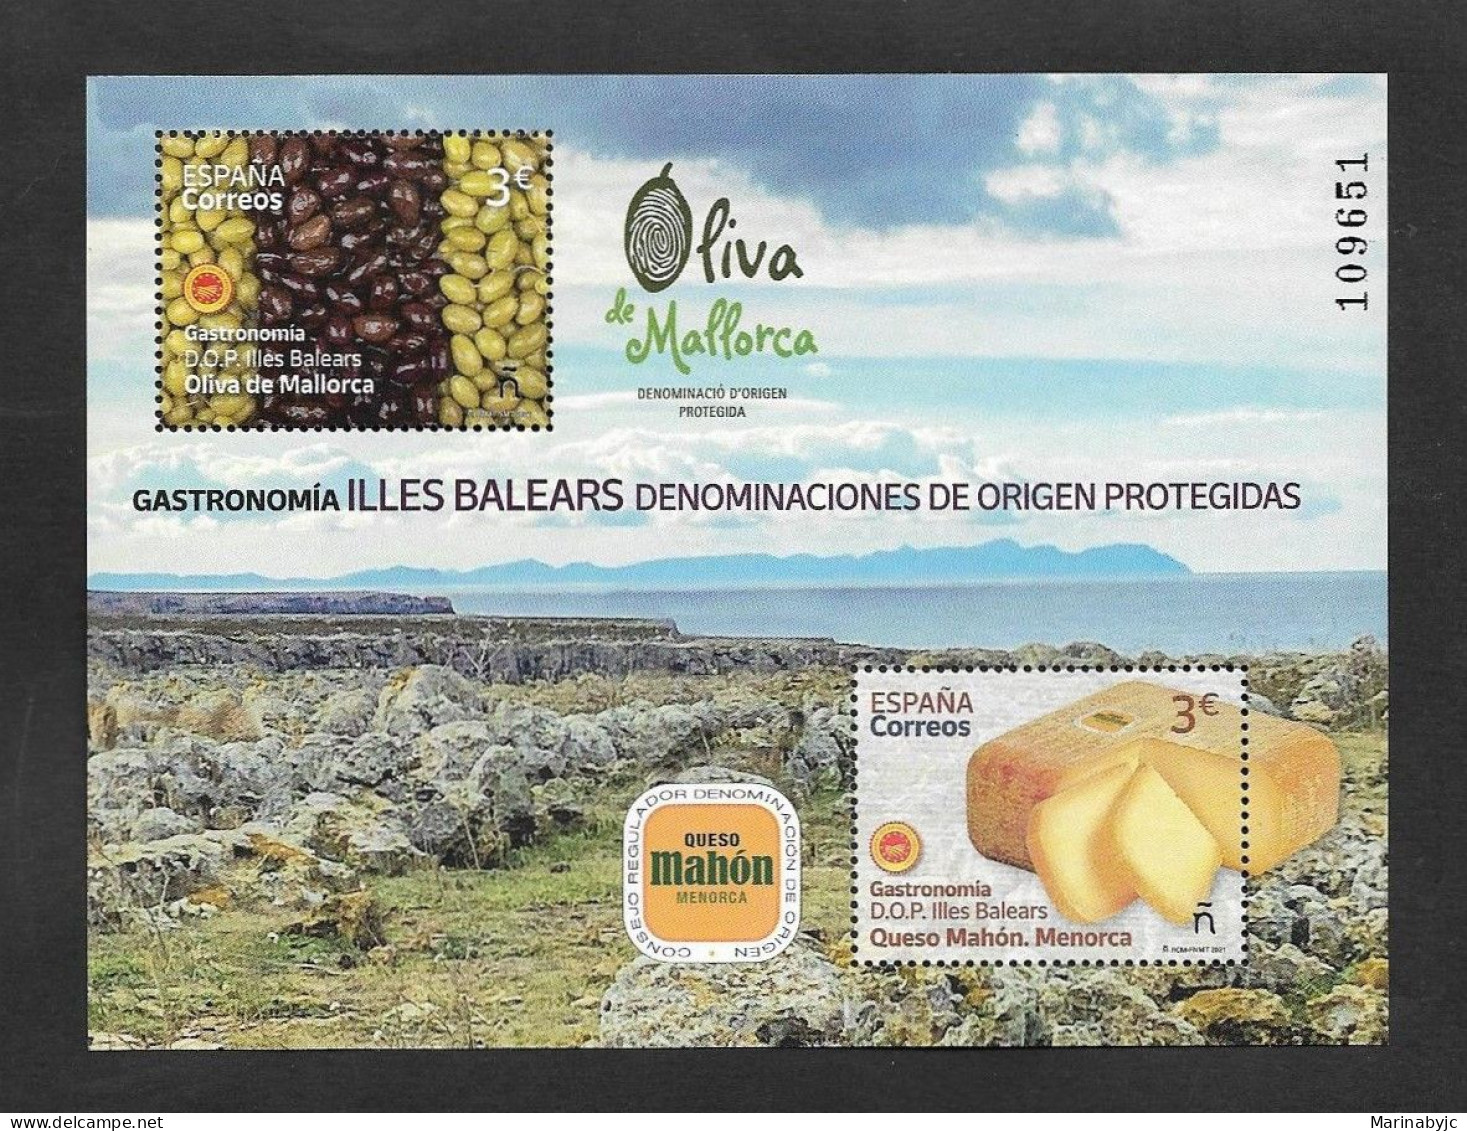 Vtaebm.SE)2021 SPAIN, GASTRONOMY OF THE BALEARIC ISLANDS, TWO STAMPS DEDICATED TO LAS OLIVAS DE MALLORCA AND MAHÓN CHE - Gebraucht